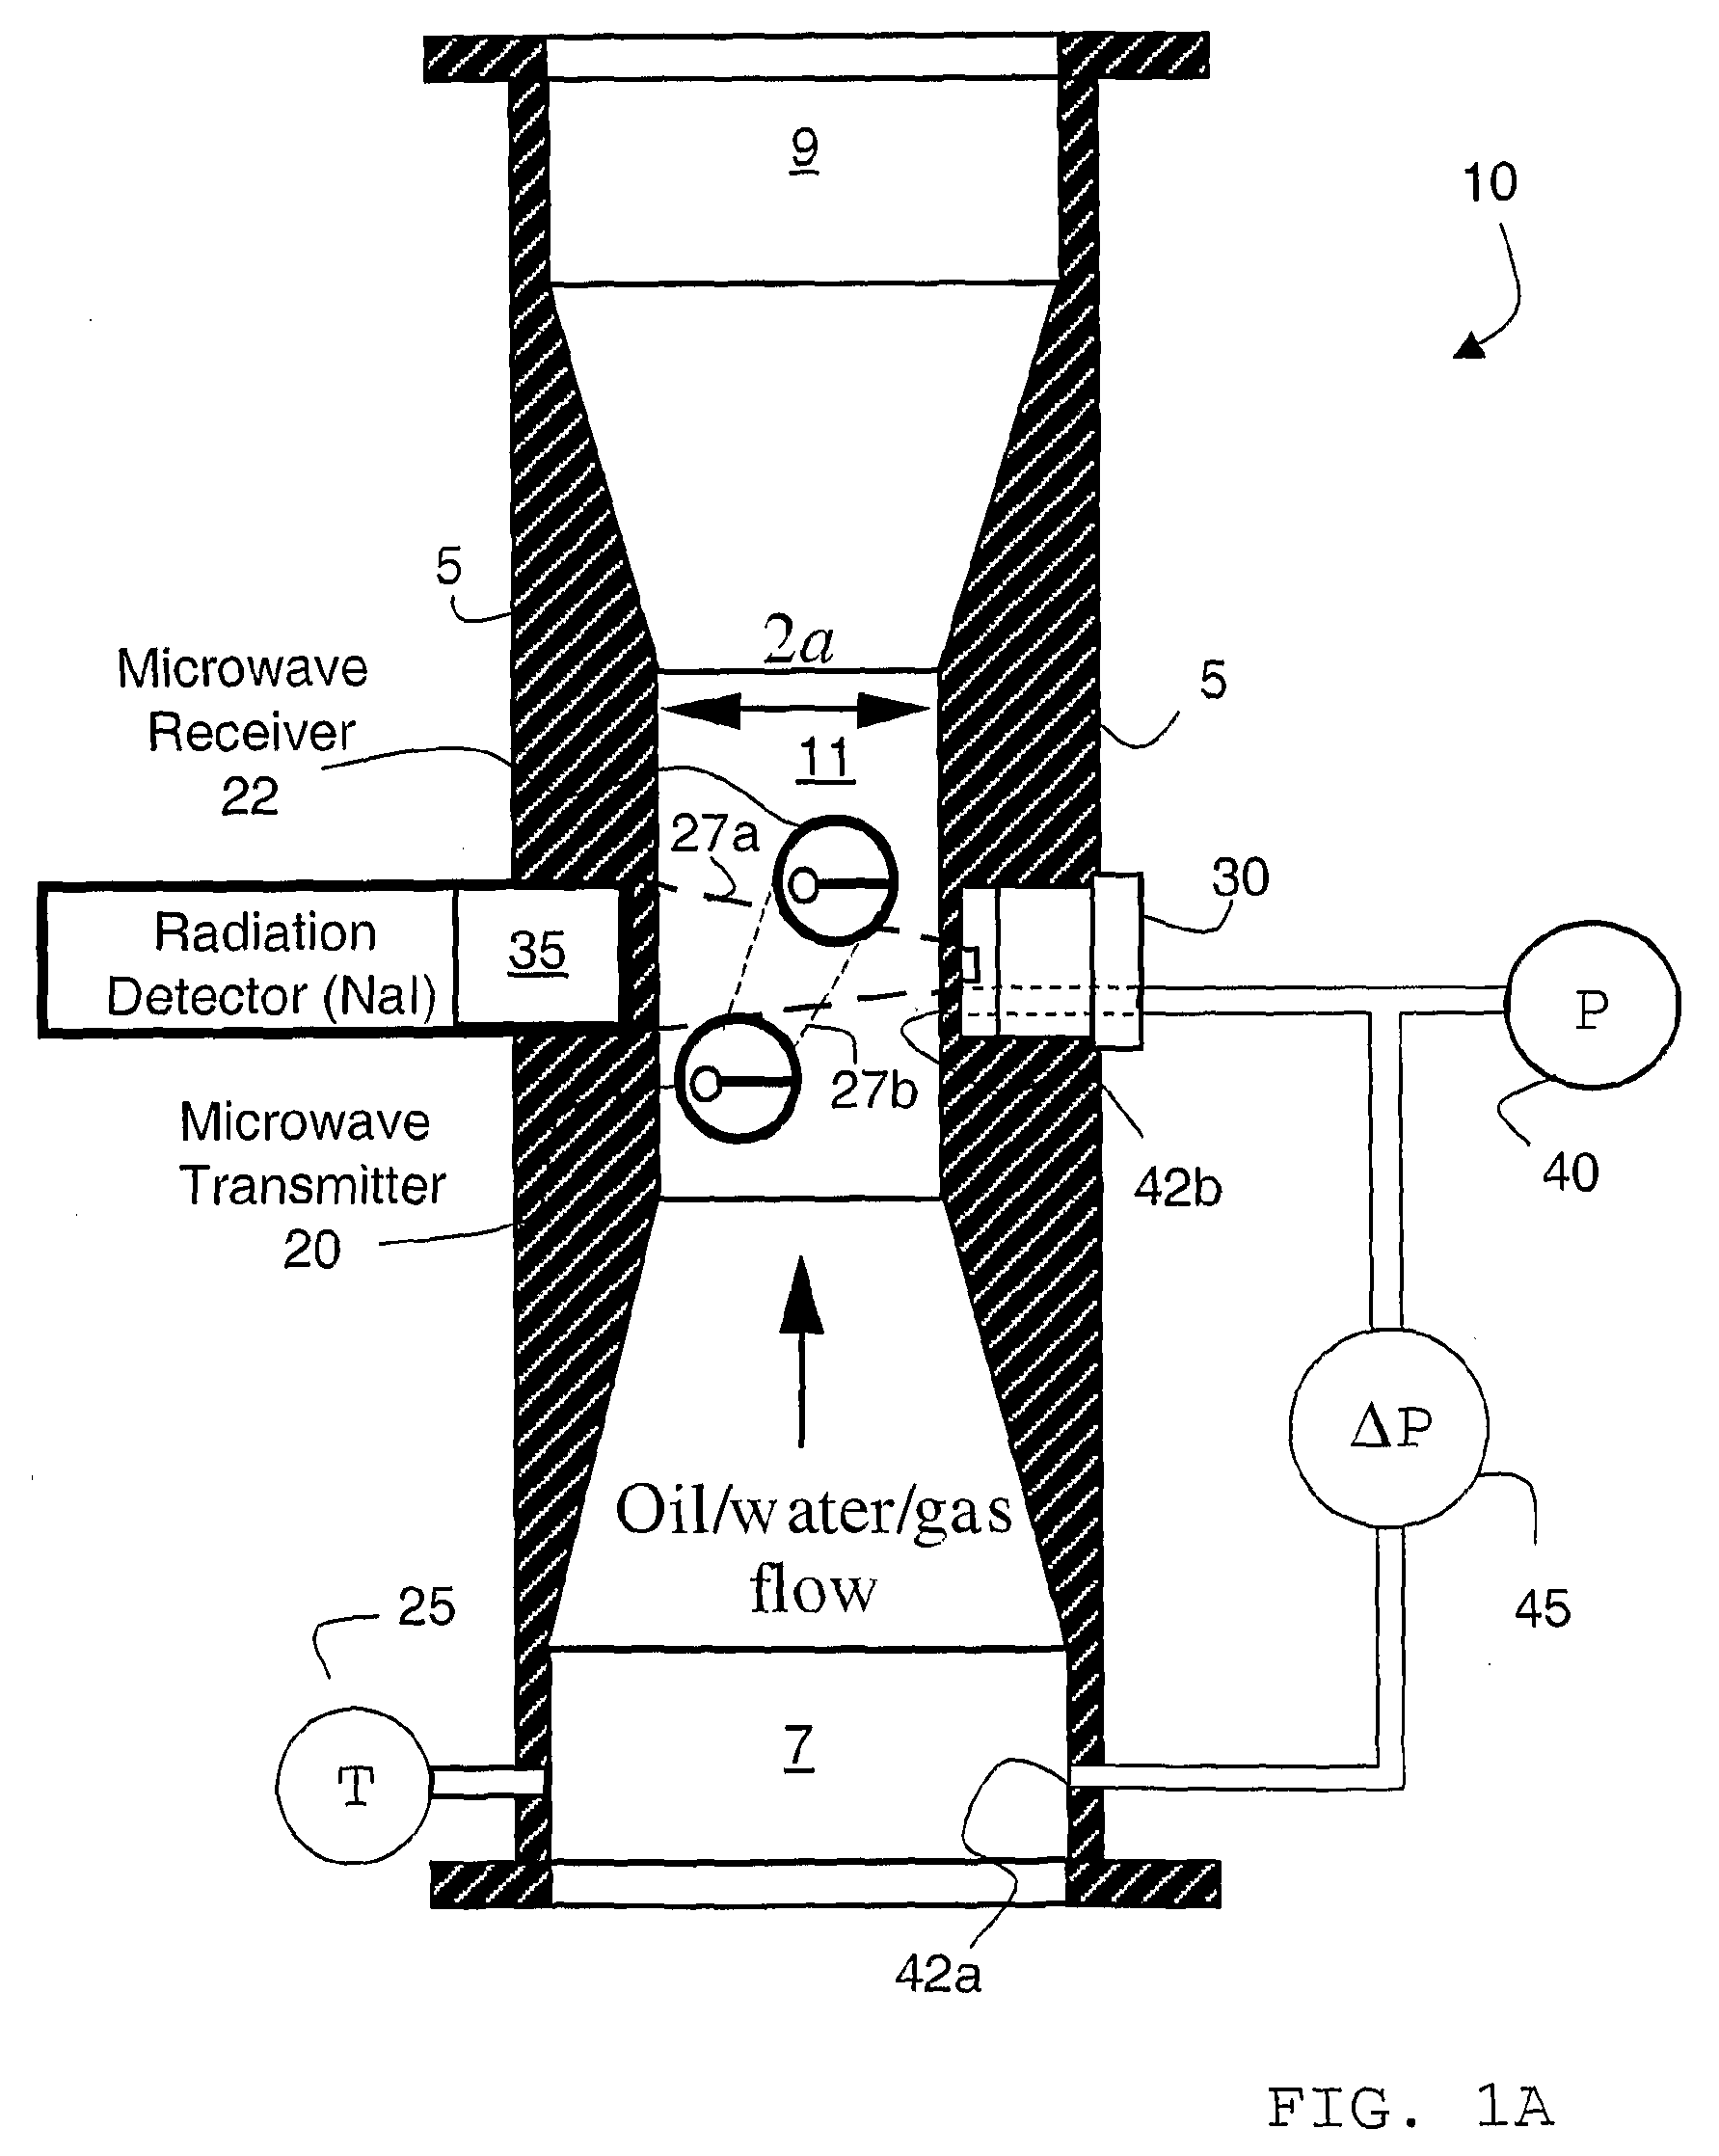 Systems and Methods For Measuring Multiphase Flow in a Hydrocarbon Transporting Pipeline